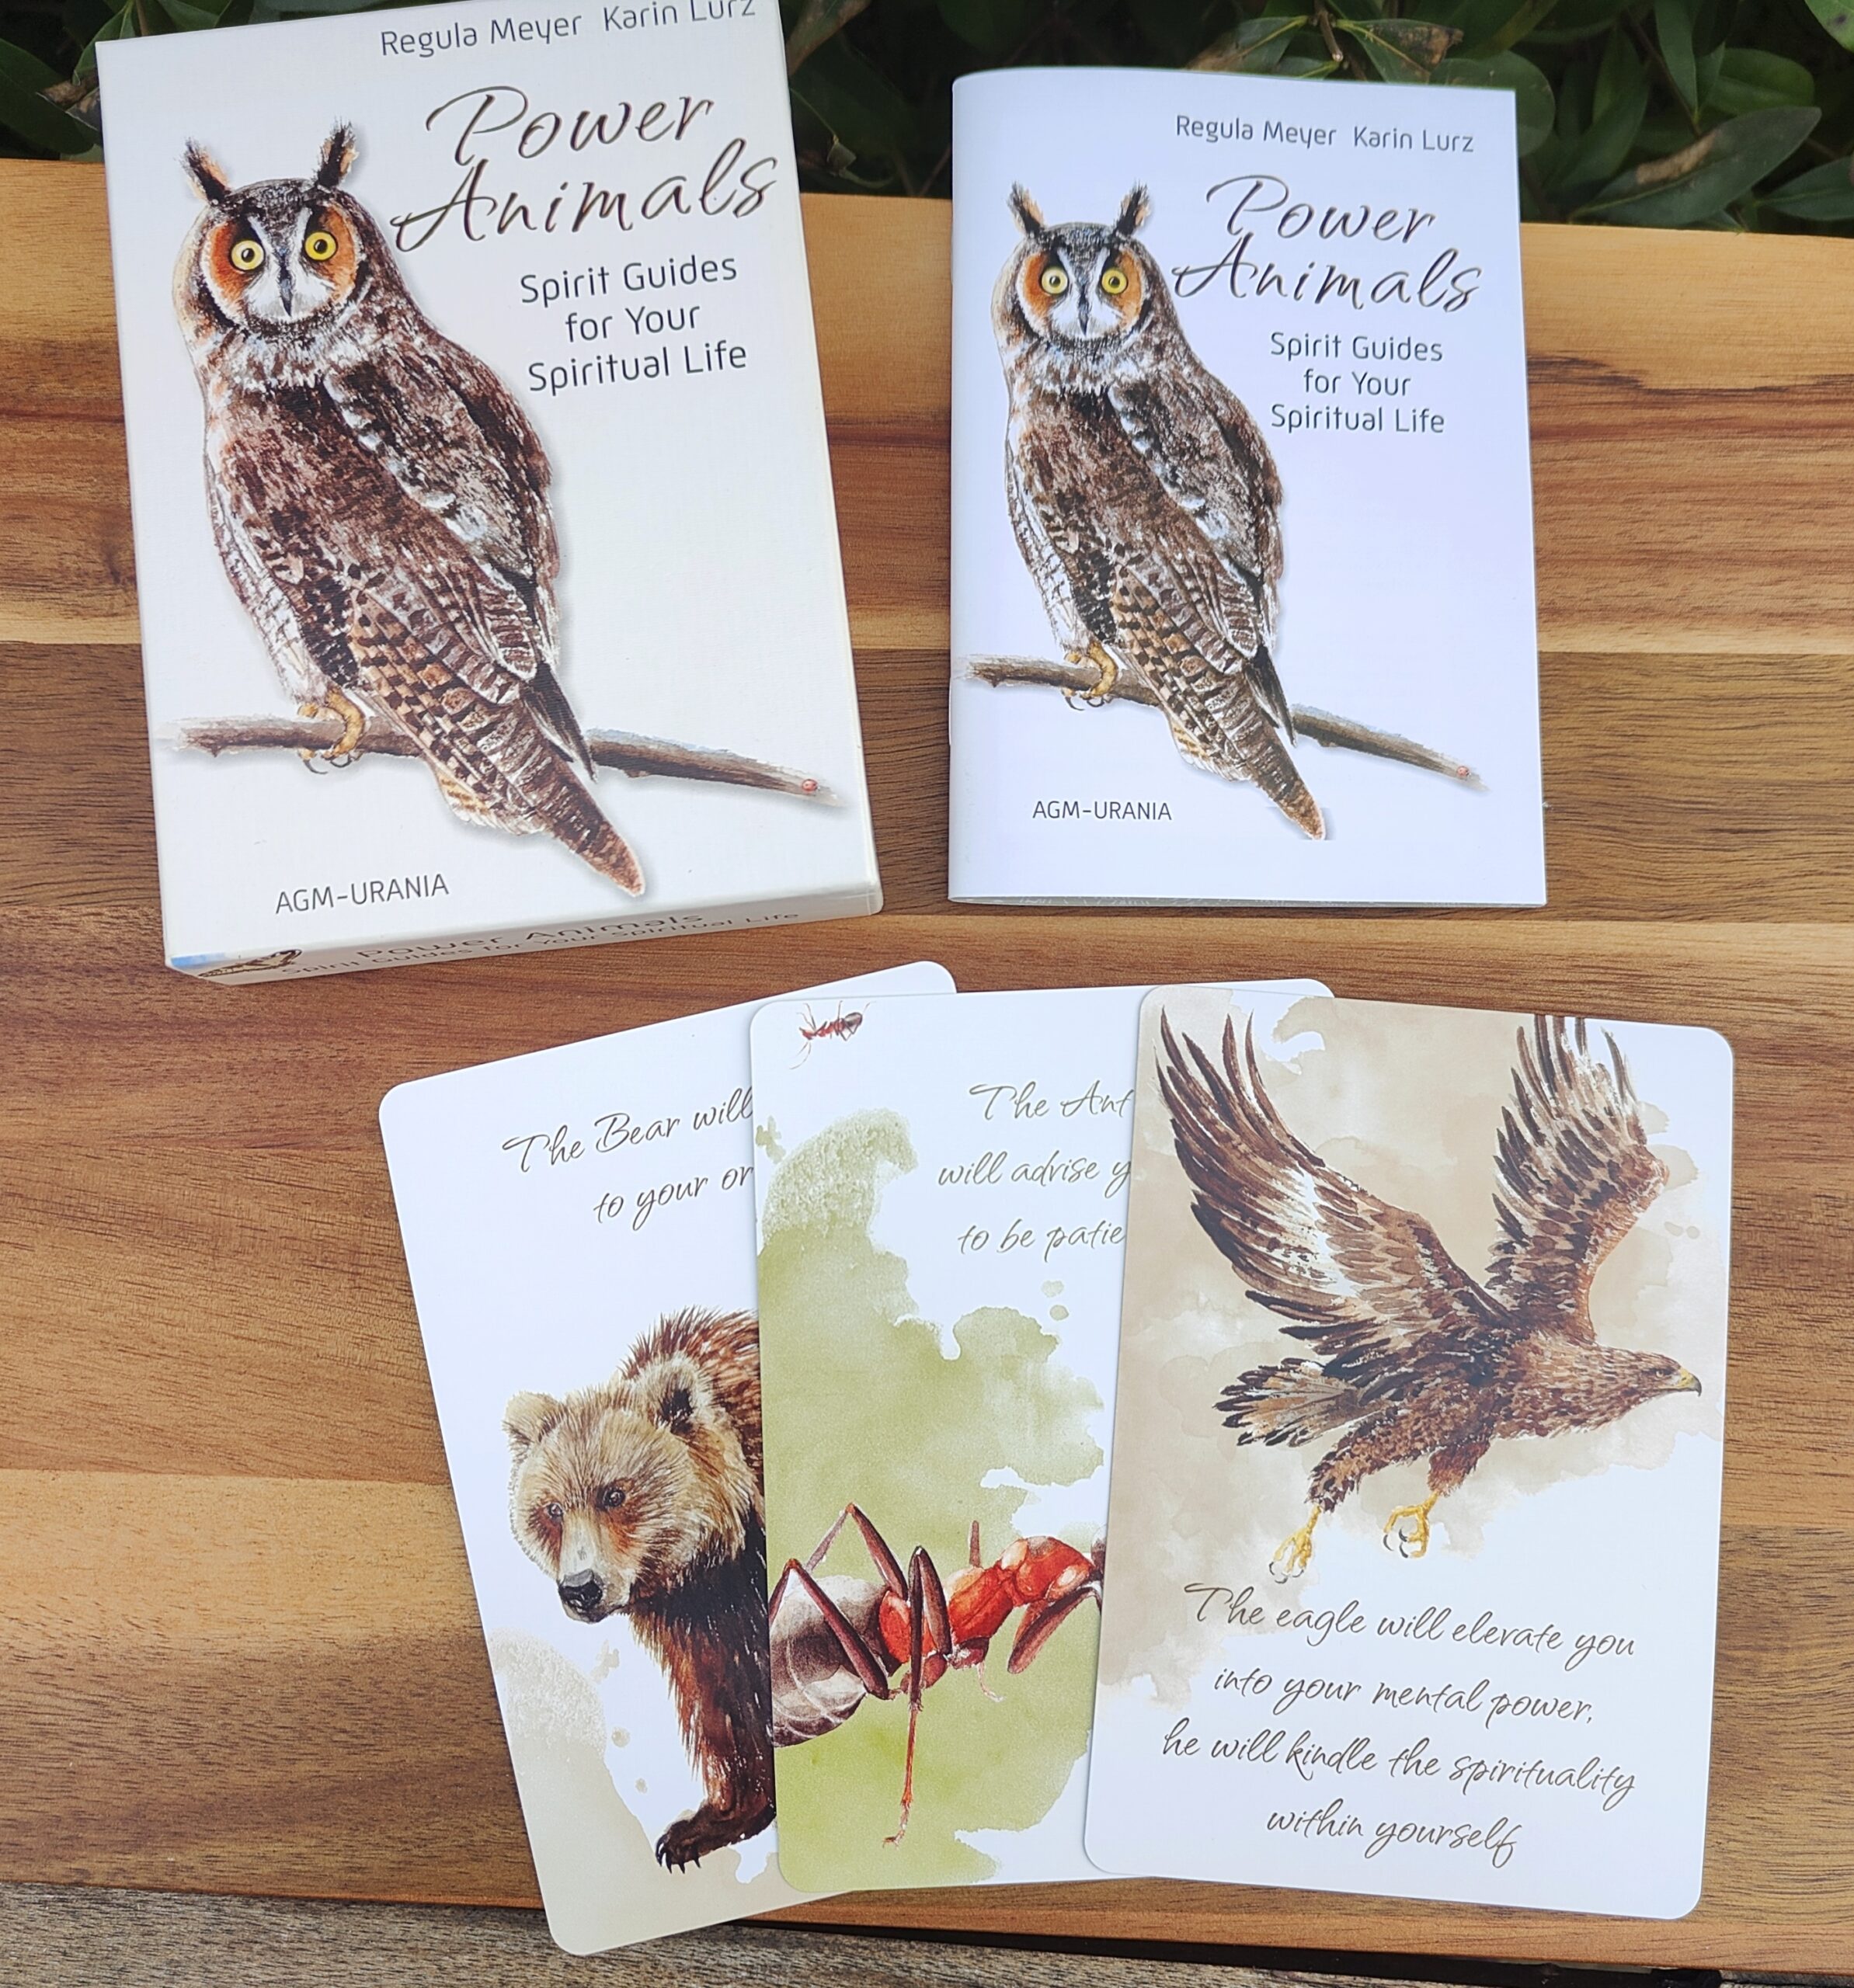 Power Animals - Spirit Guides for Your Spiritual Life (2. Hand)